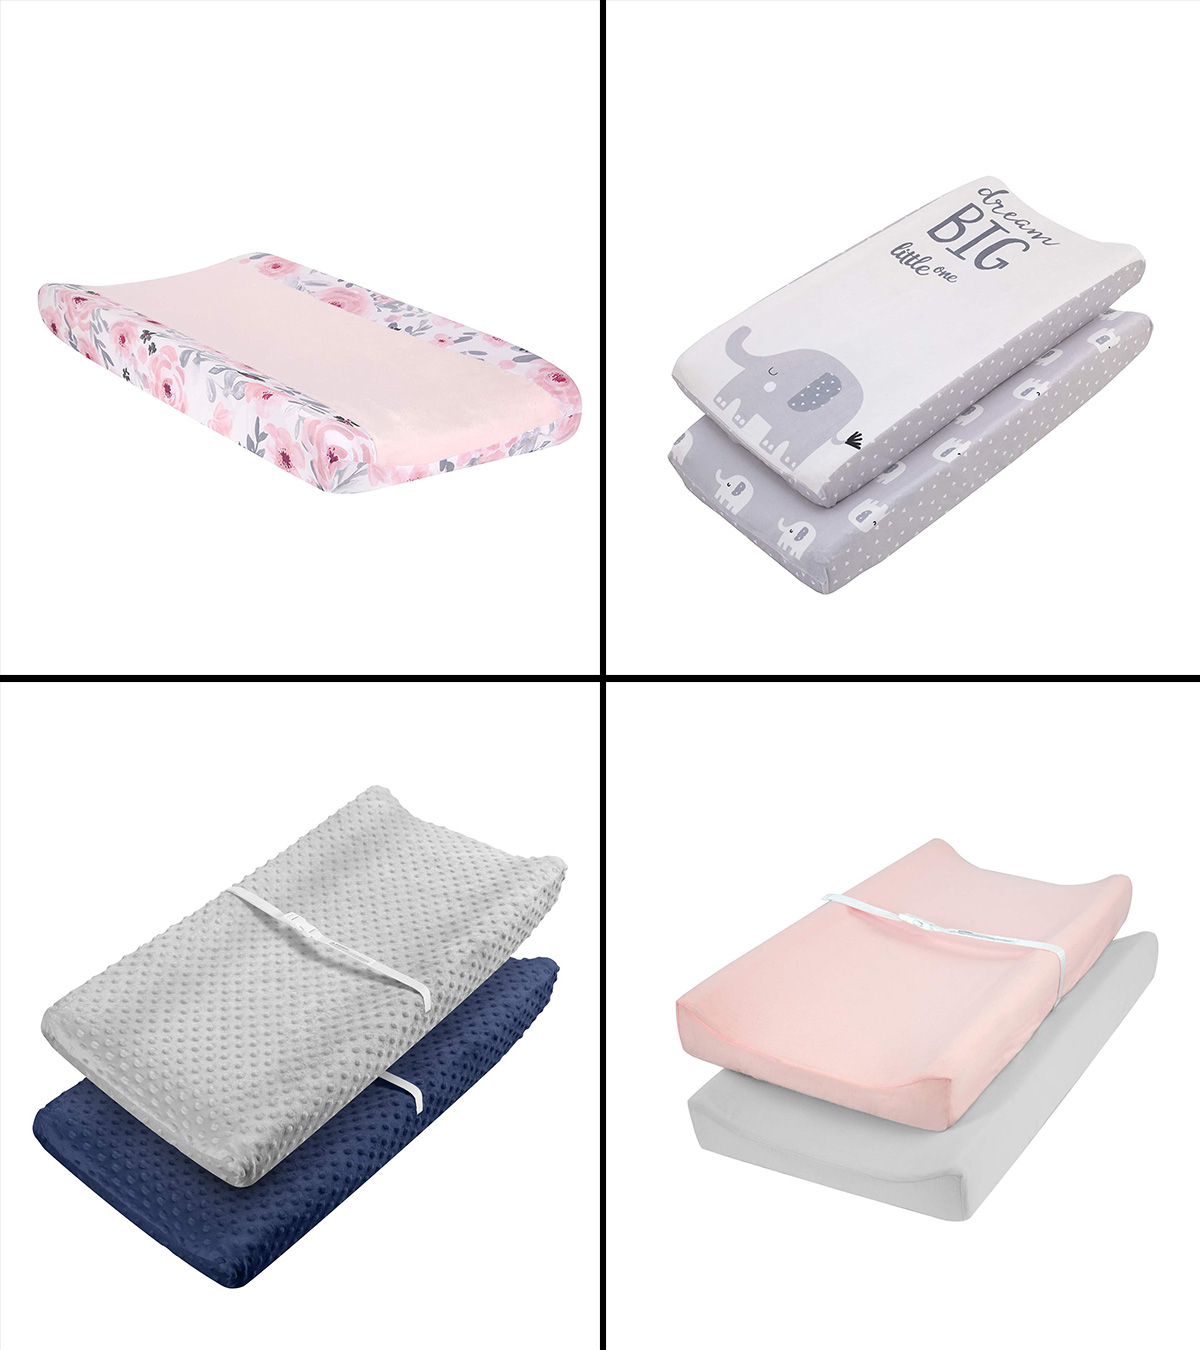 Portable Coral Fleece Diaper pad Liner Soft and Comfortable Waterproof Changing pad Liner by BlueSnail Gray 